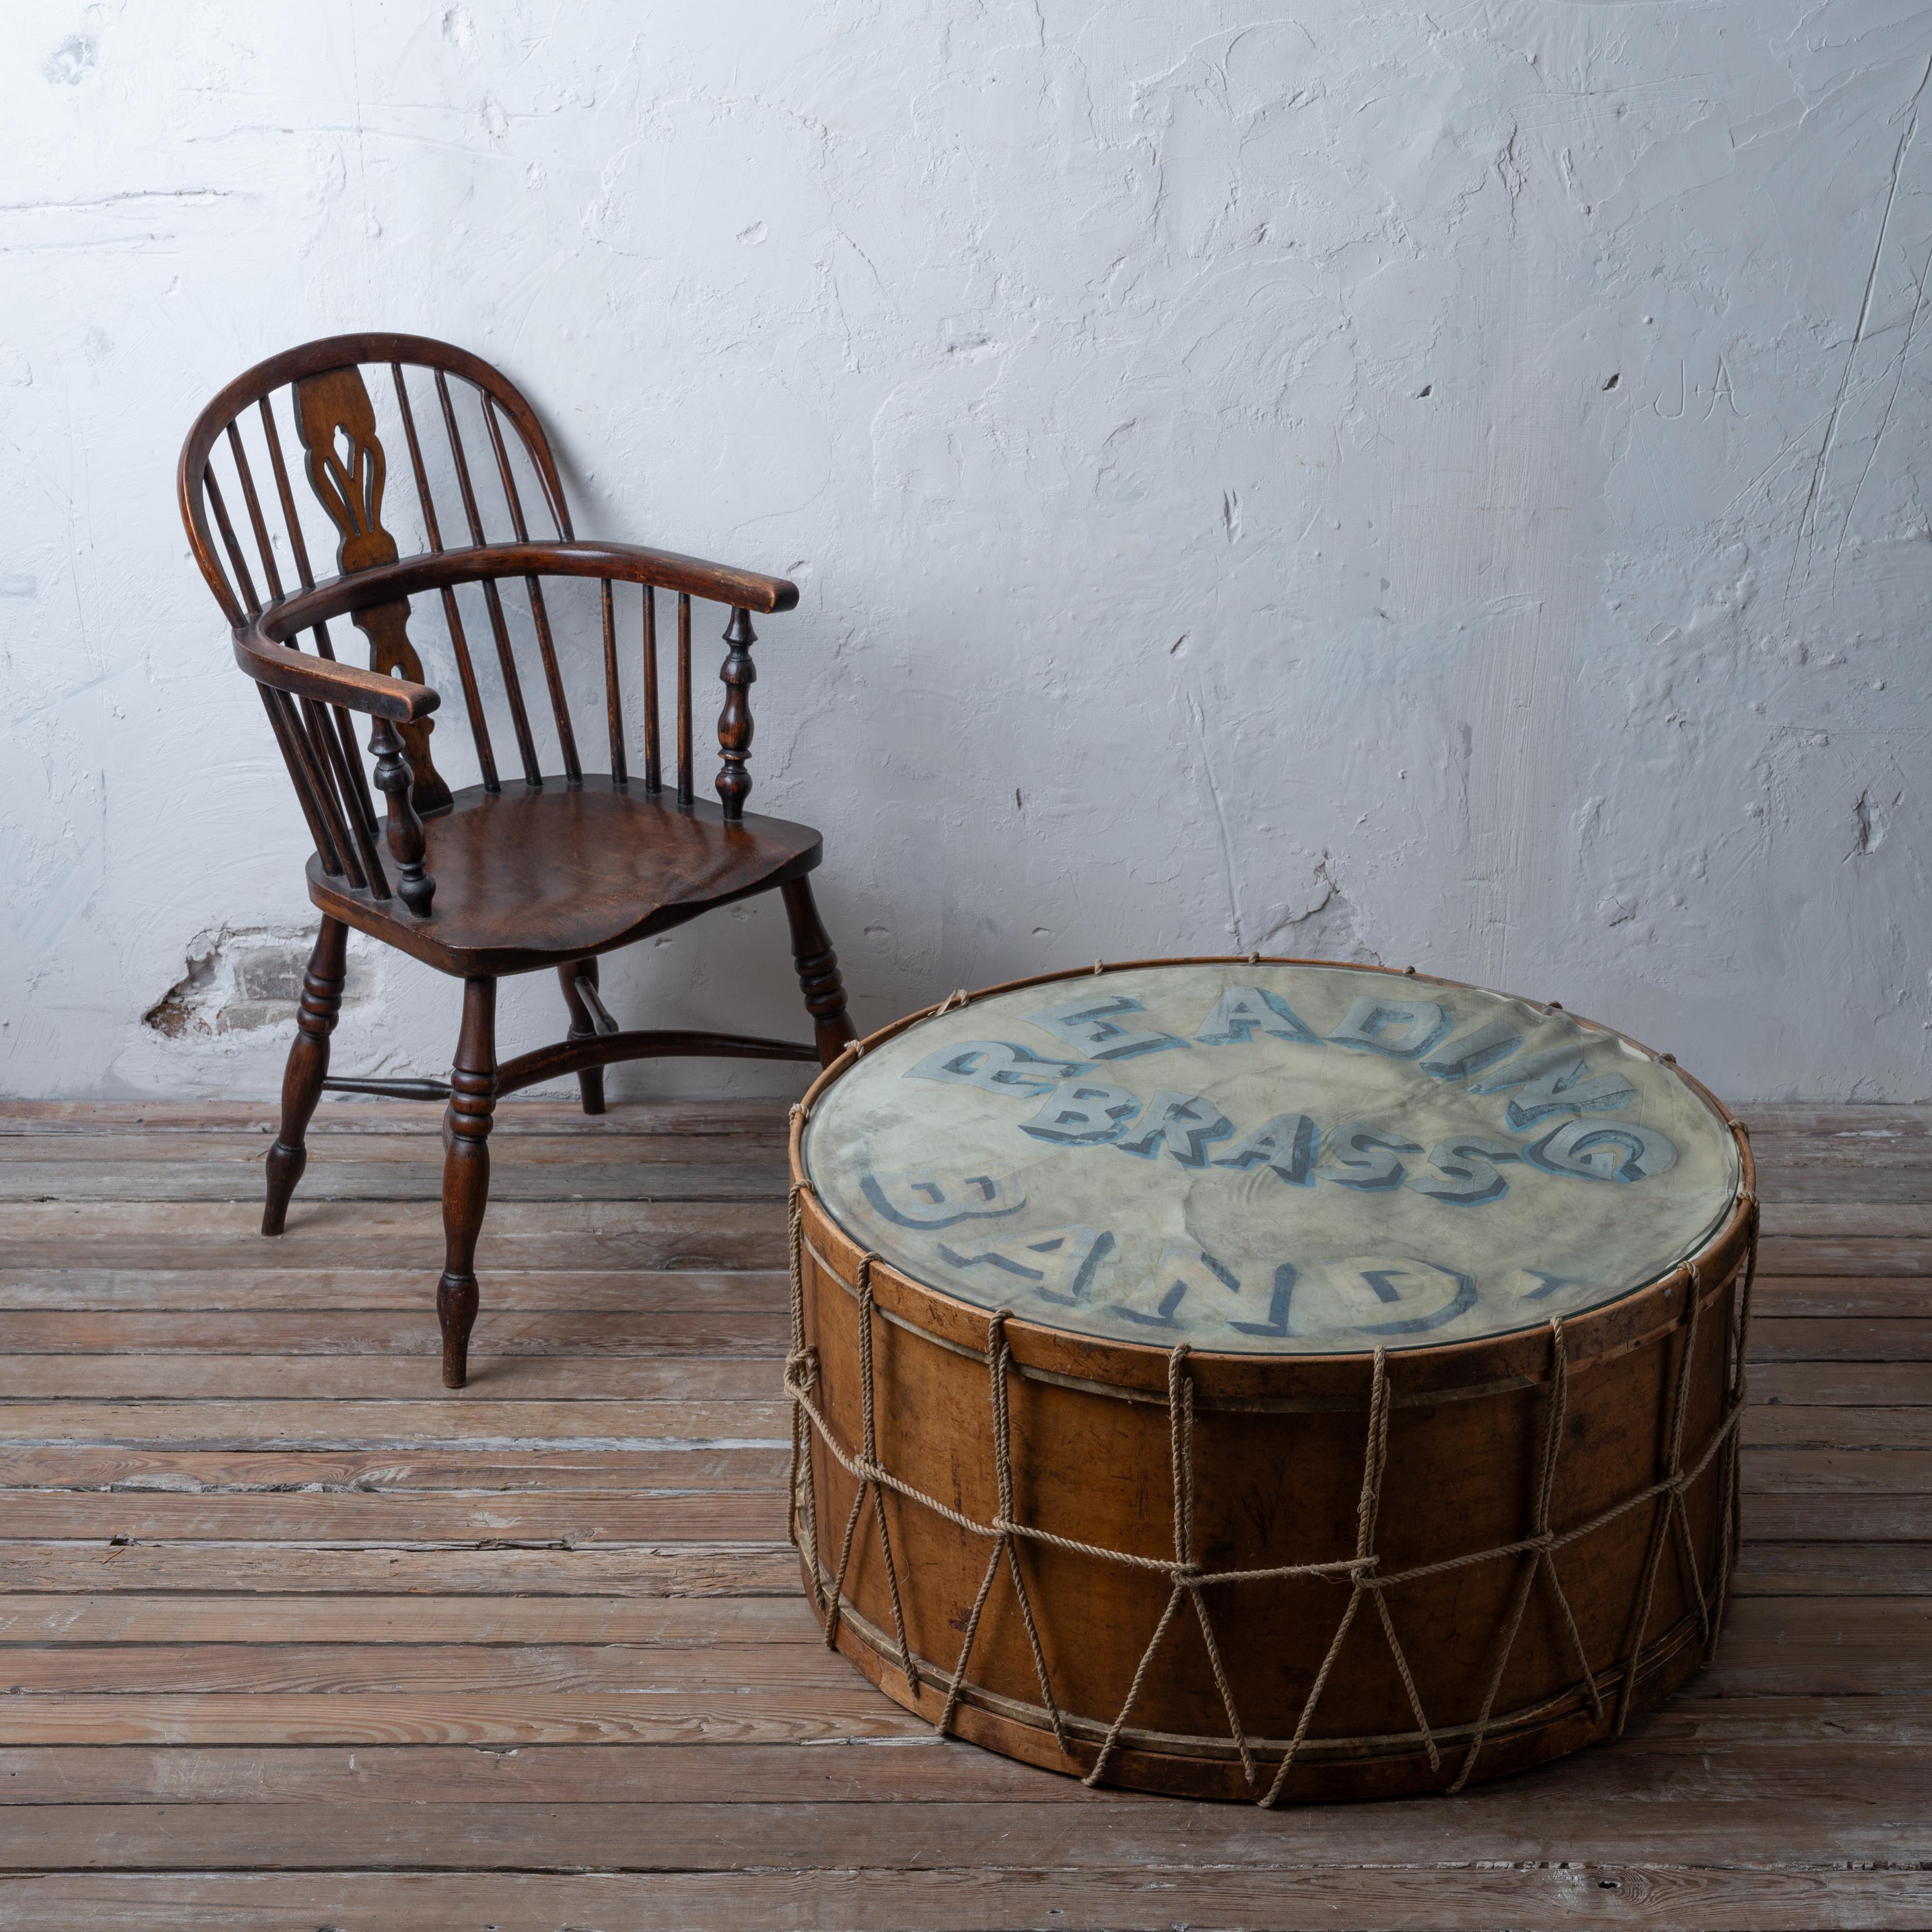 A large “Circular” drum made by J.B. Treat of Boston, circa 1860s.  Fitted glass top.

Used by the Reading Brass Band who are well documented in the Boston Globe as having performed at Republican rallies, veteran parades and many other events in the